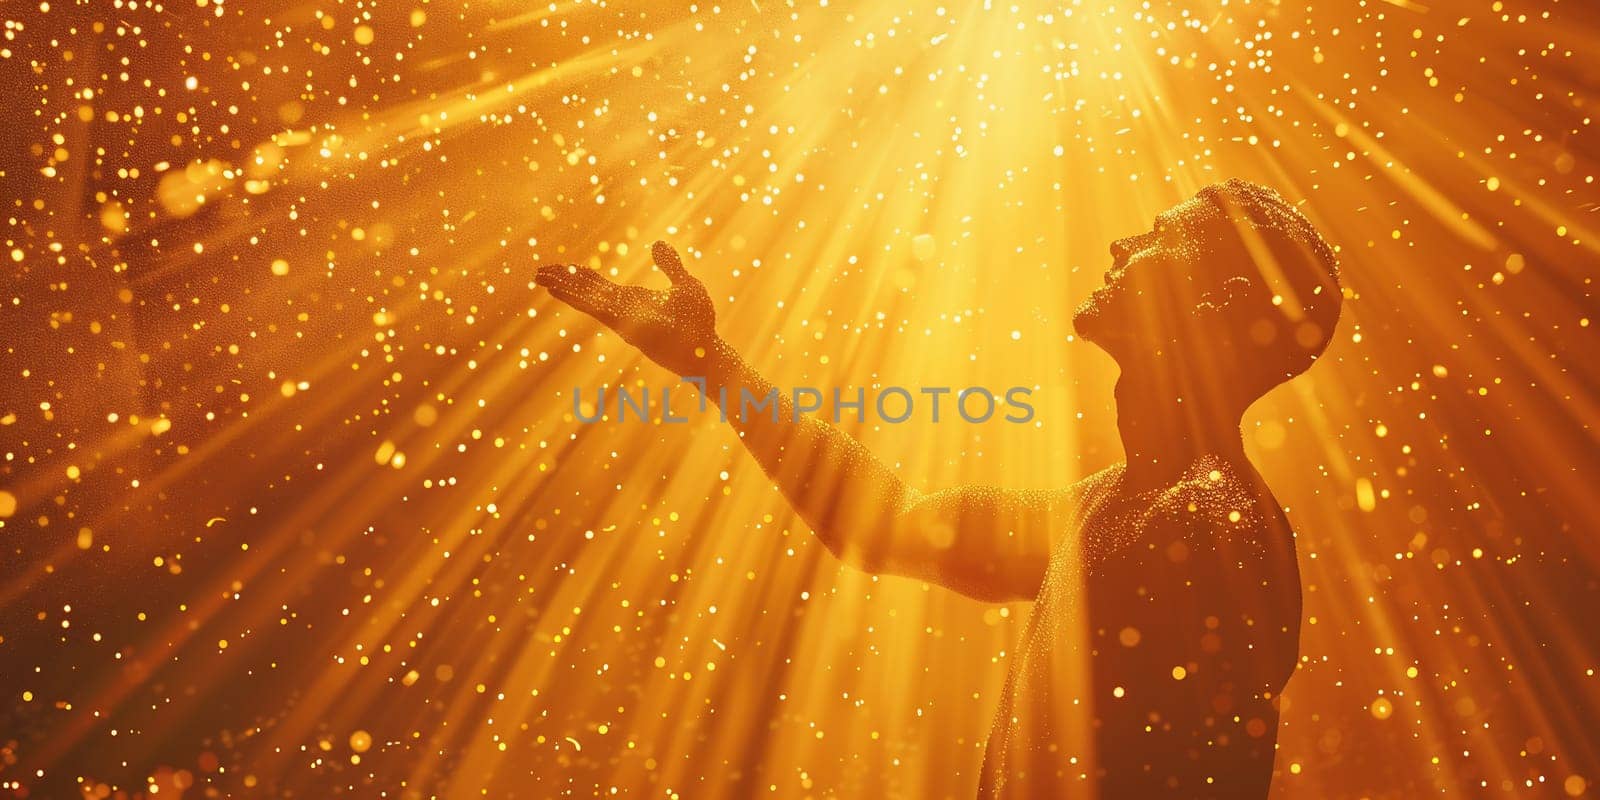 Man holding arms up in praise against a sunburst by Andelov13